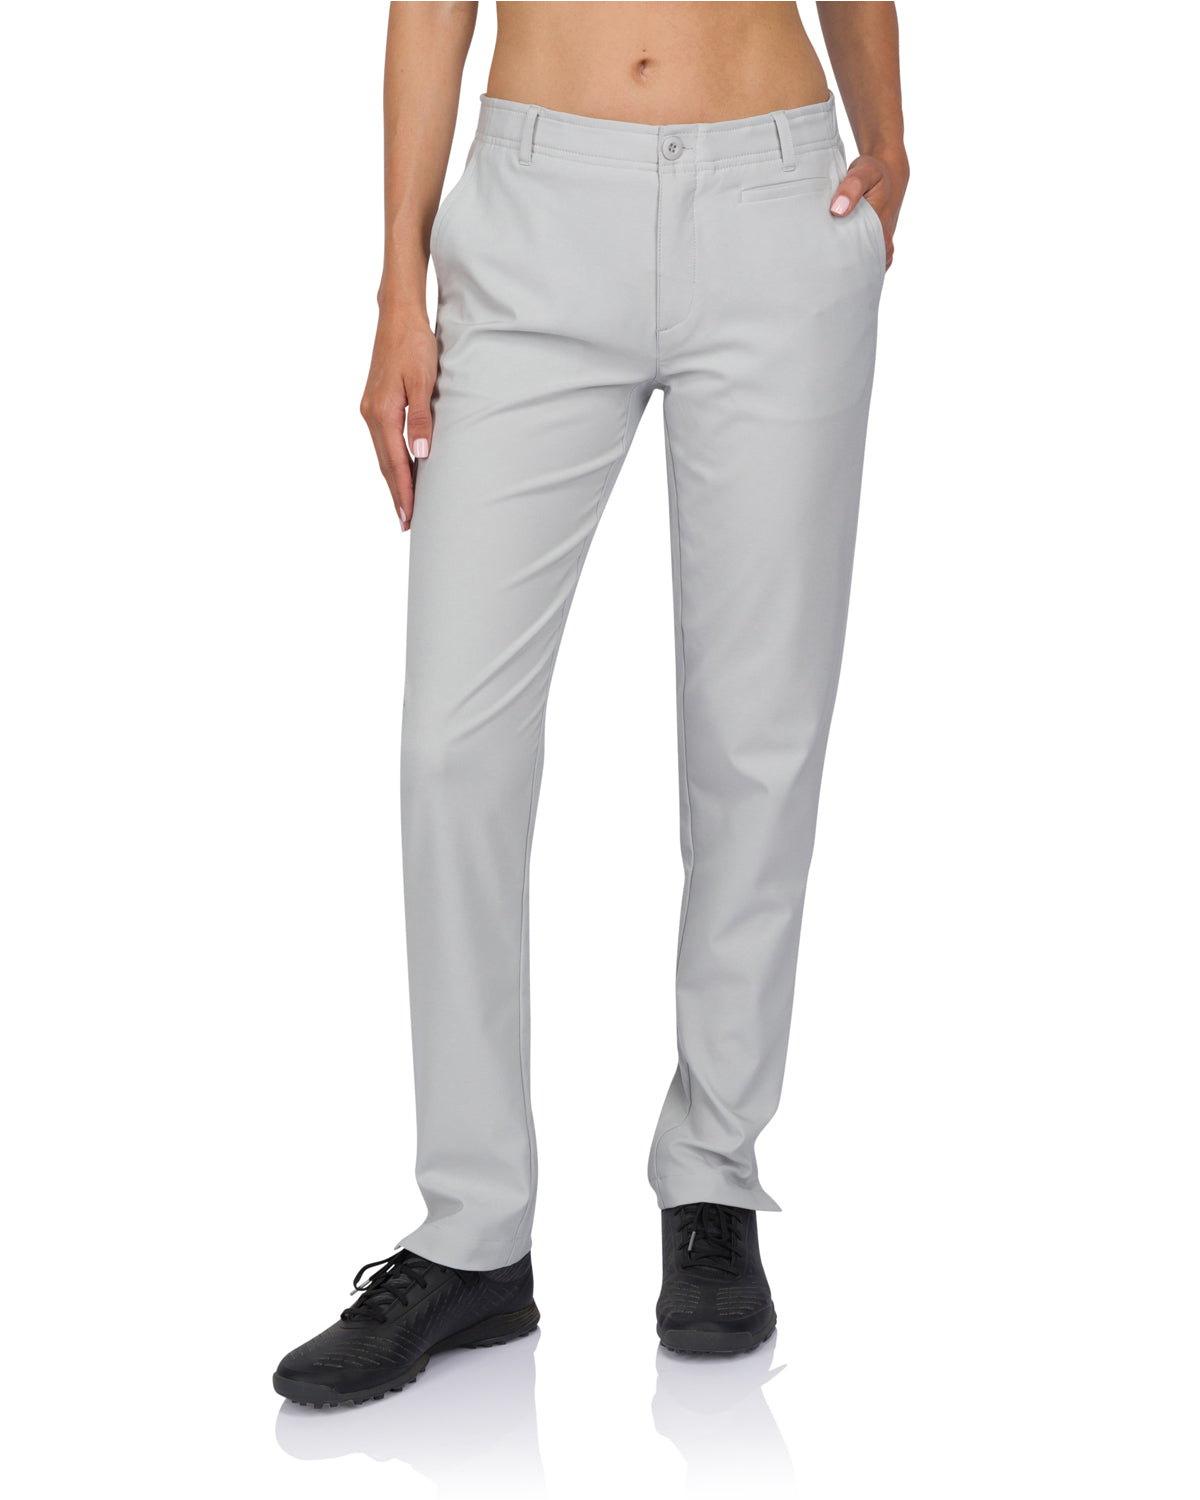 048568 EAGLE TAILORED QUICK DRY WOMENS GOLF TROUSERS